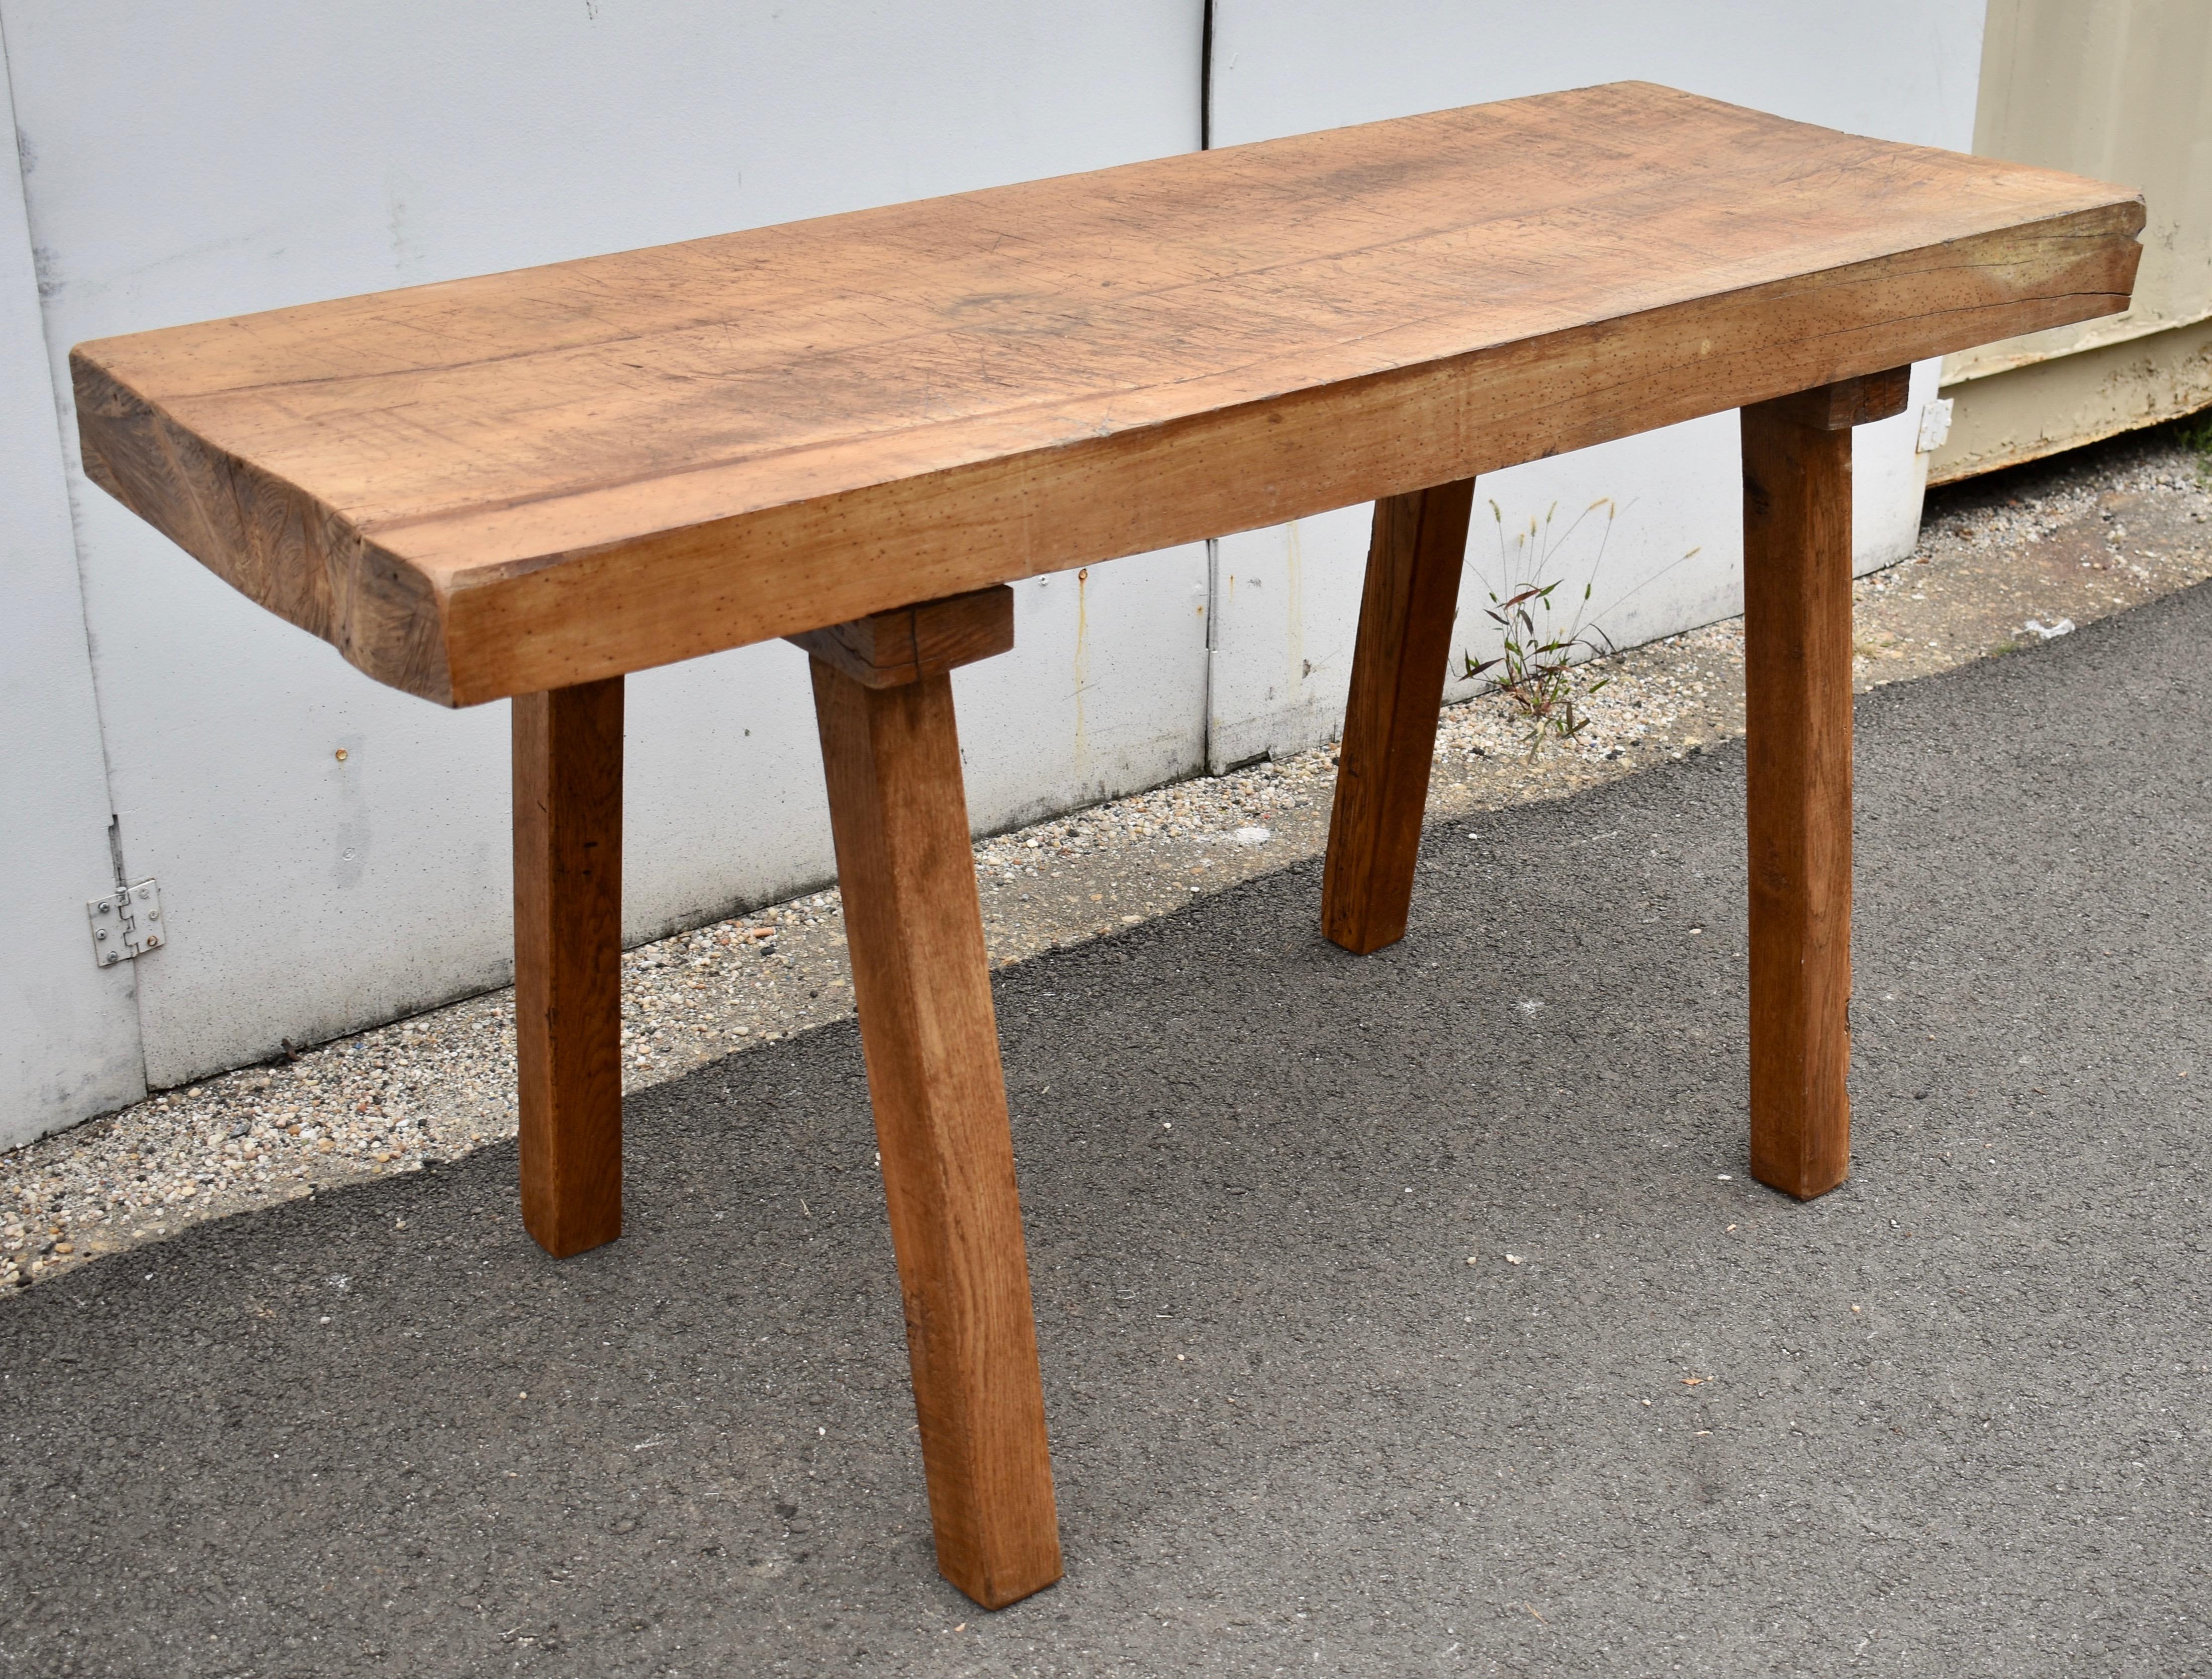 Hungarian Oak Pig Bench Butcher's Block Table For Sale